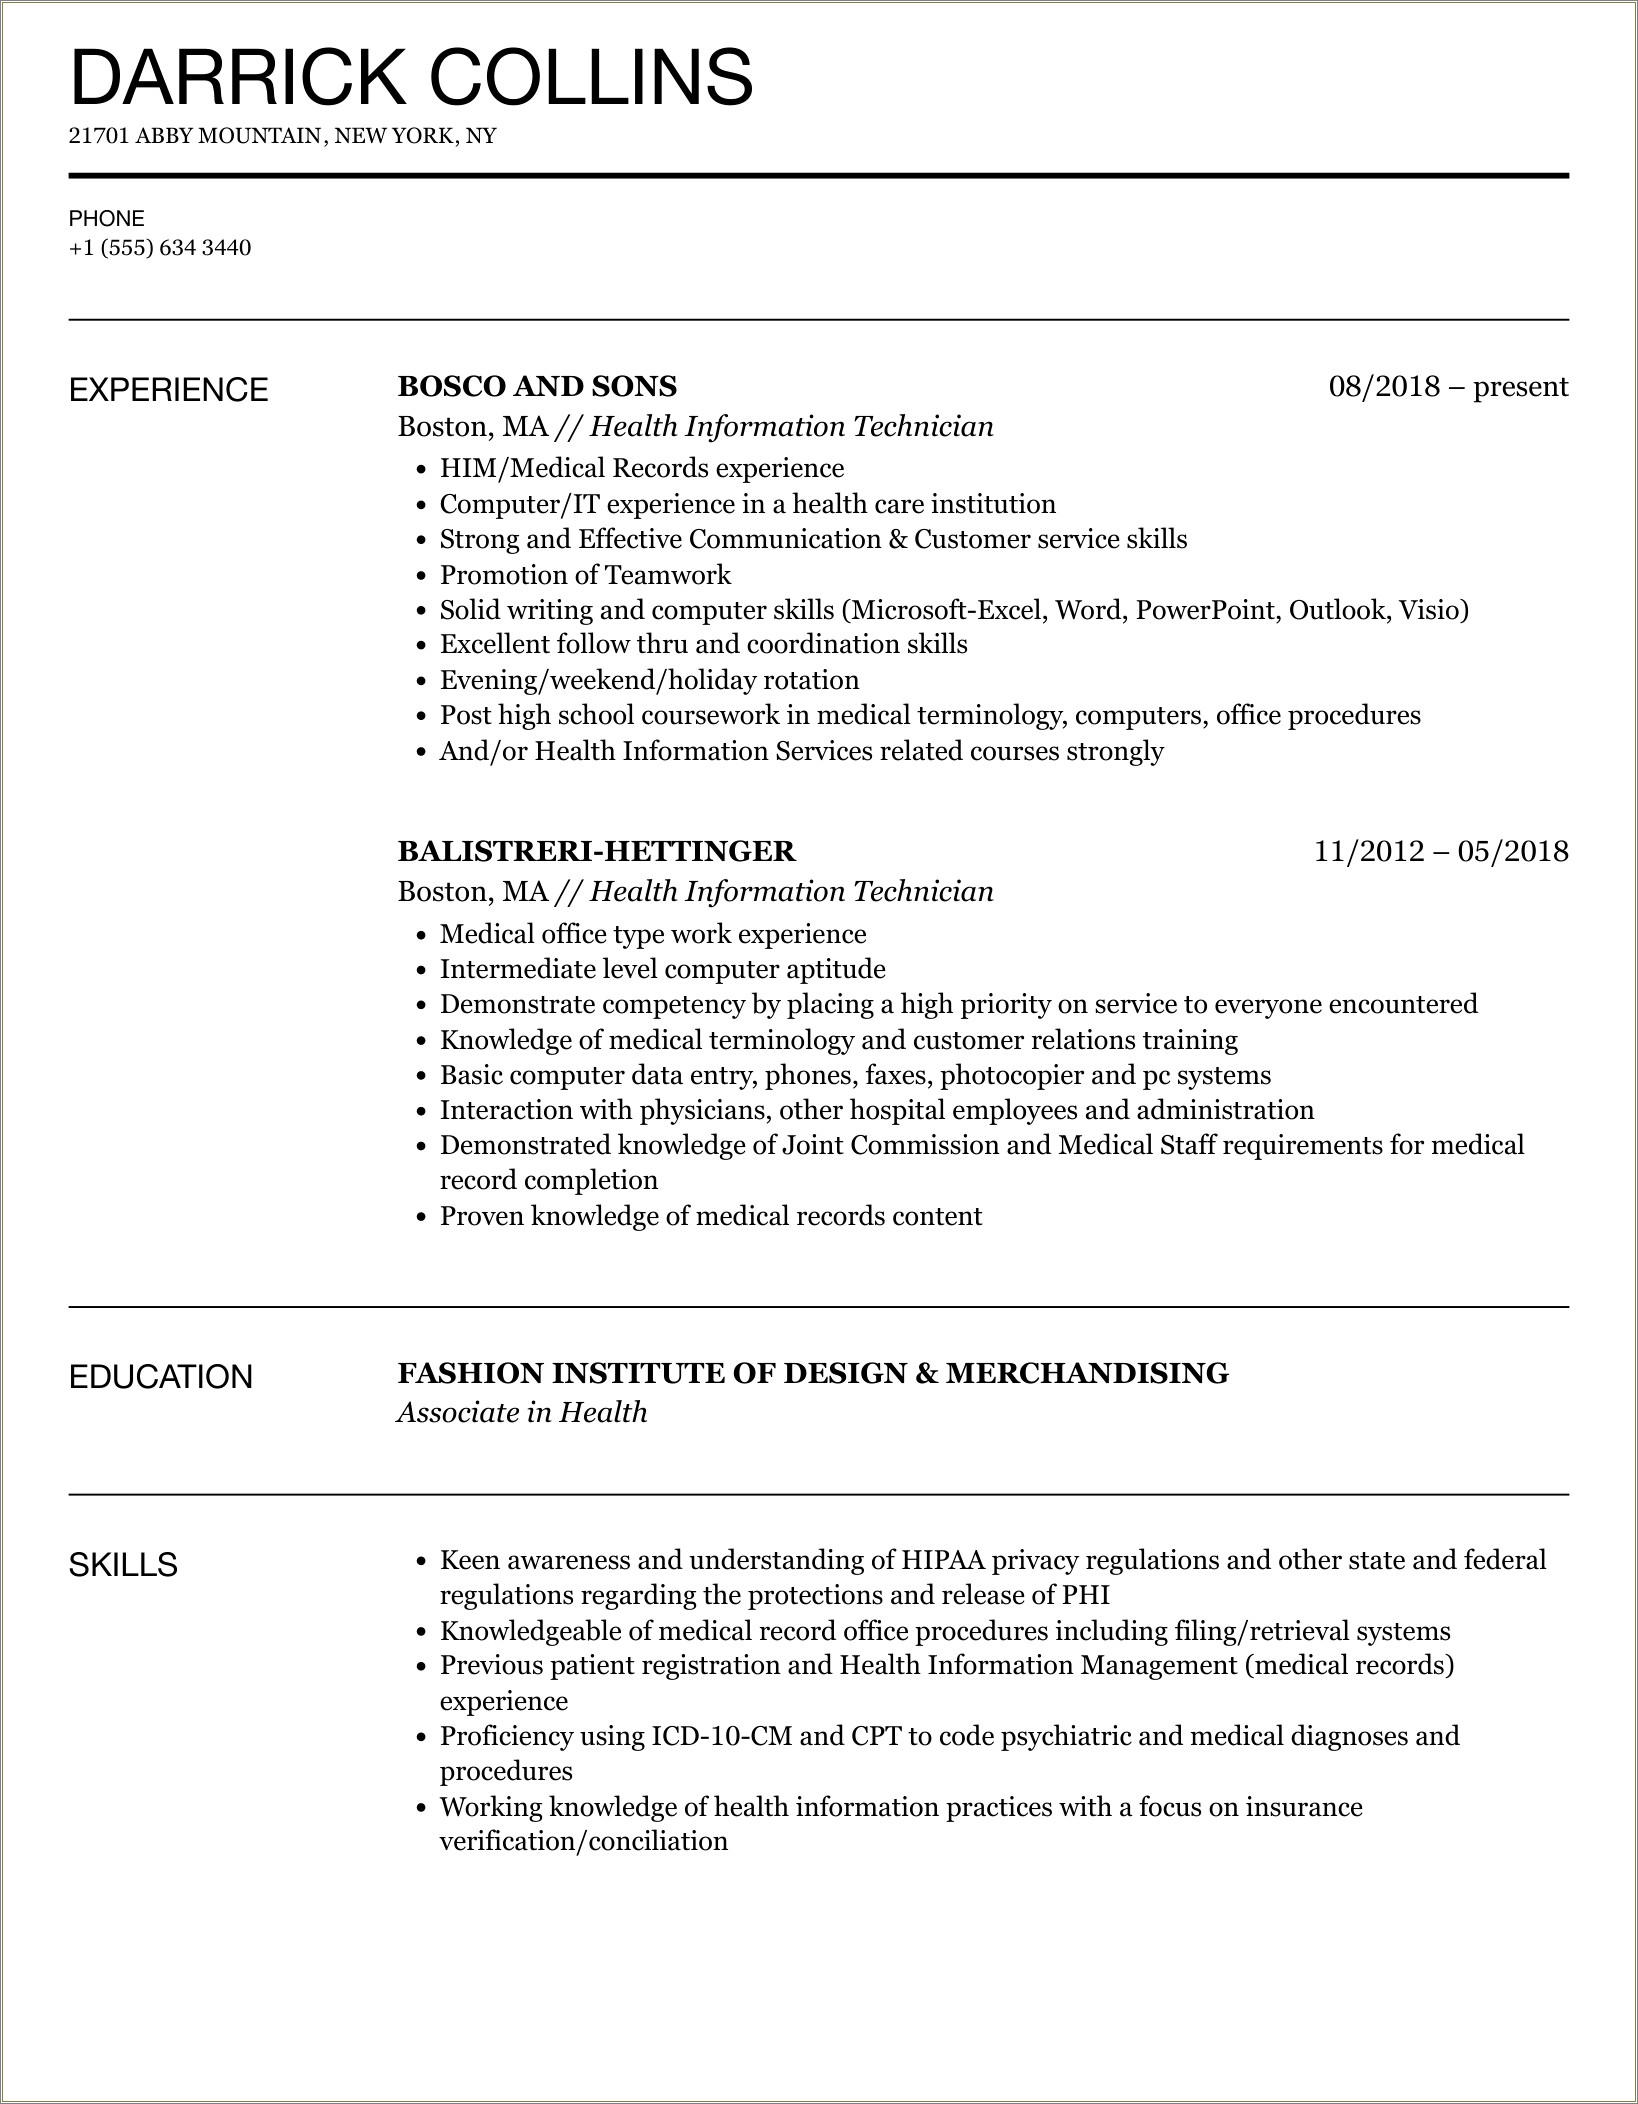 Resume Objective Examples For Entry Level Information Technology